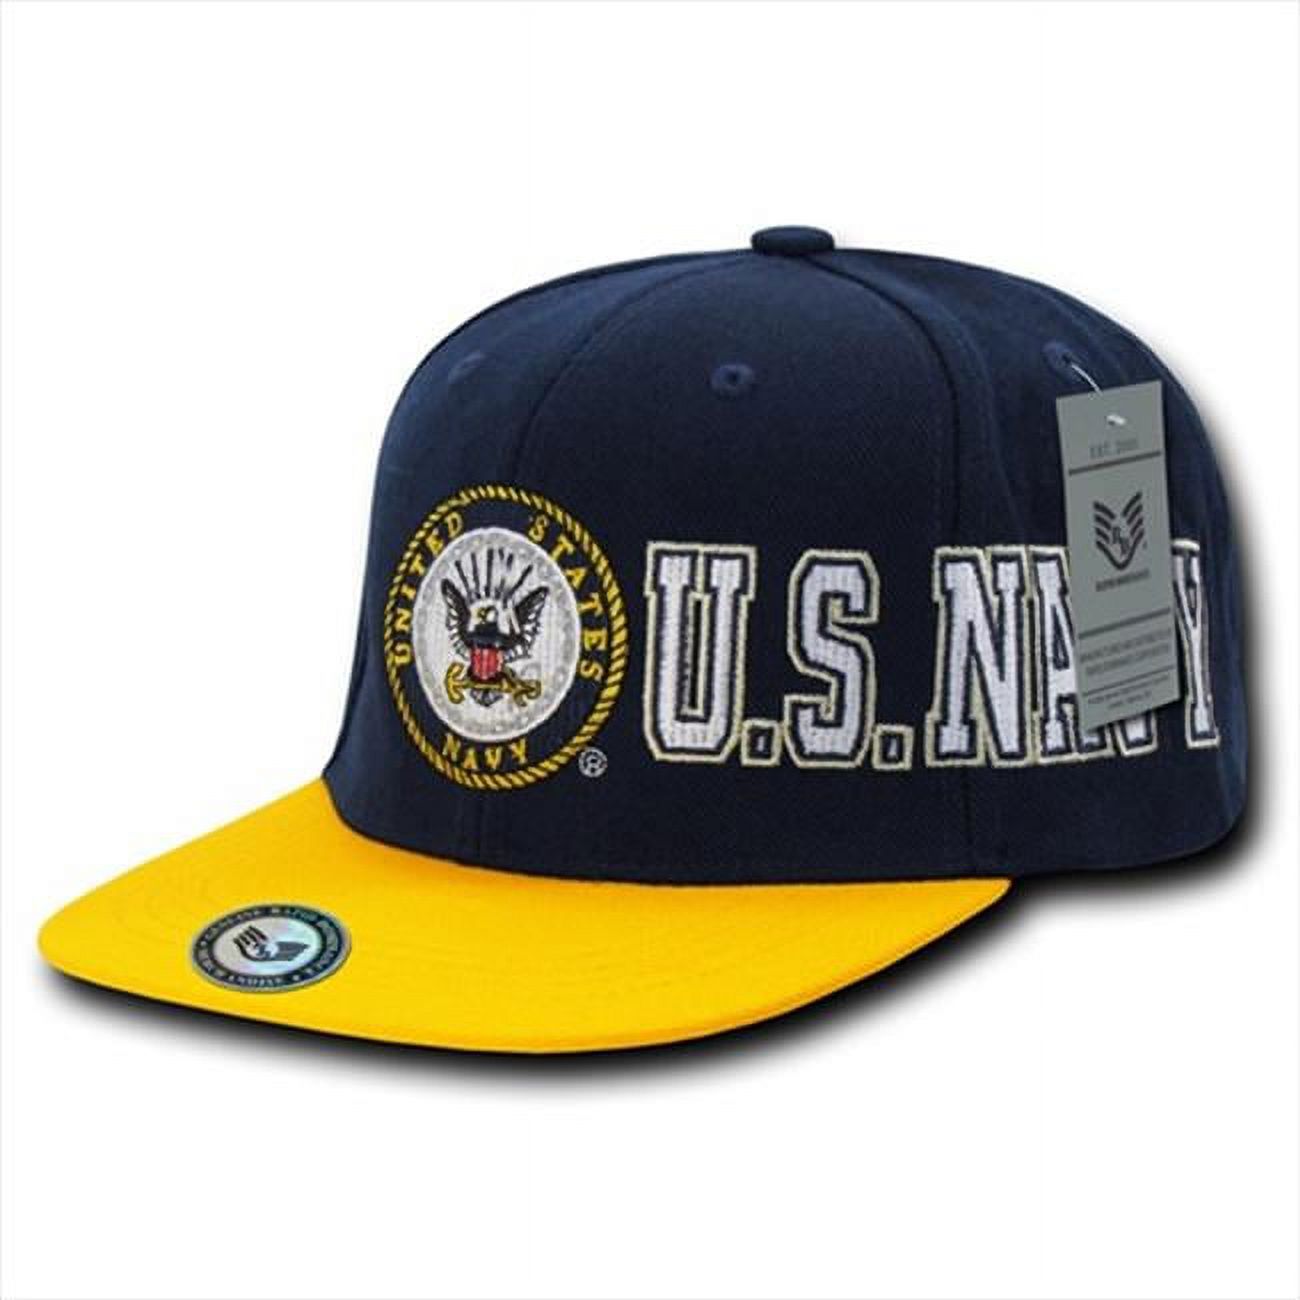 Rapid Dominance Navy D-Day Military Mens Snapback Cap [Navy Blue/Gold - Adjustable] - image 1 of 2